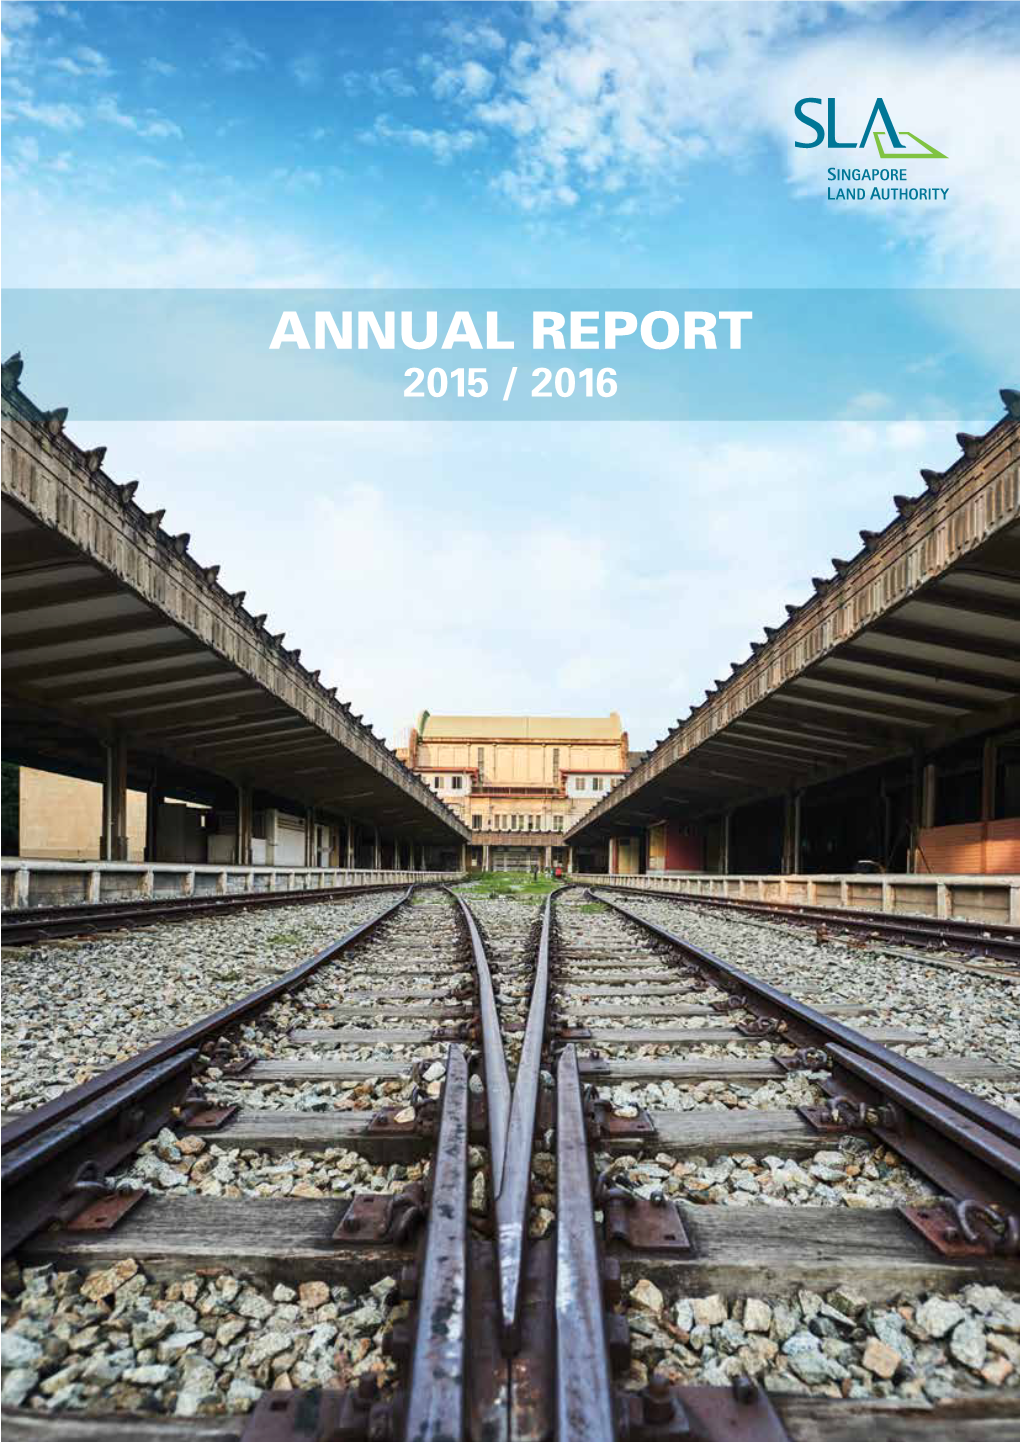 Annual Report 2015 / 2016 Contents